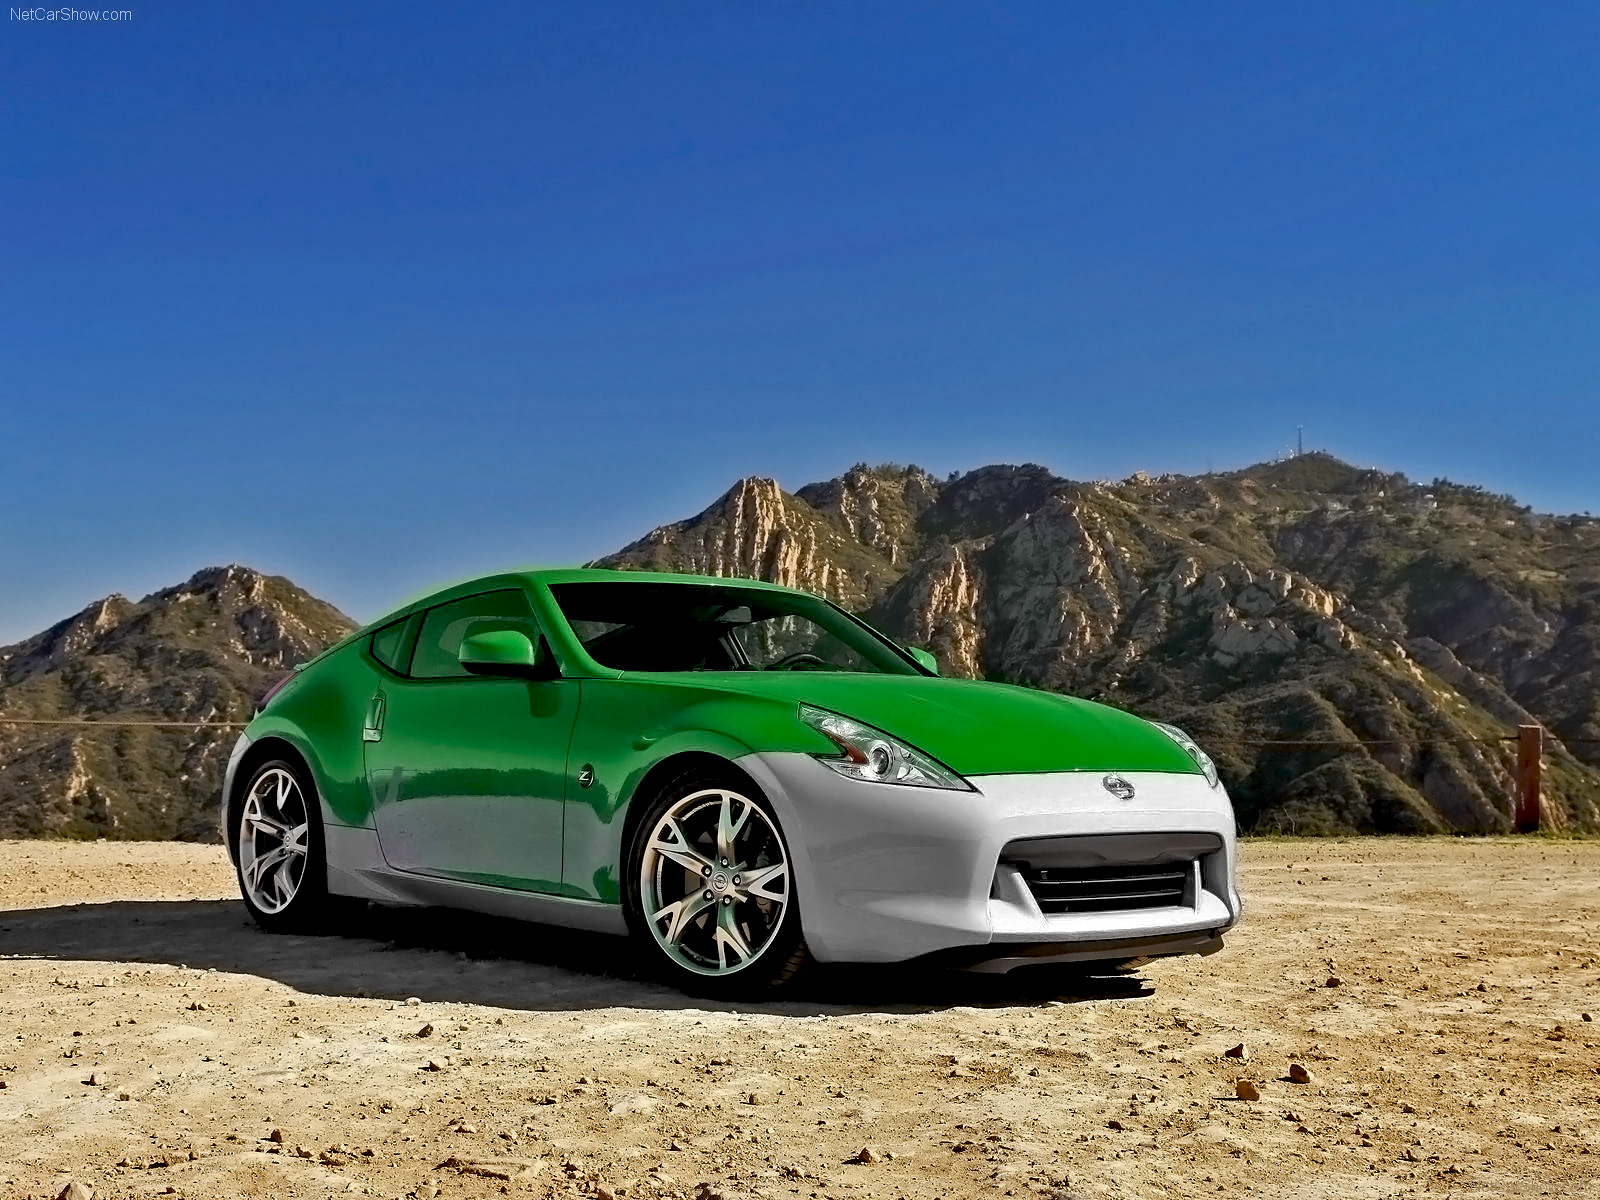 Nissan Car HD Wallpapers-1080p - 9to5 Car Wallpapers